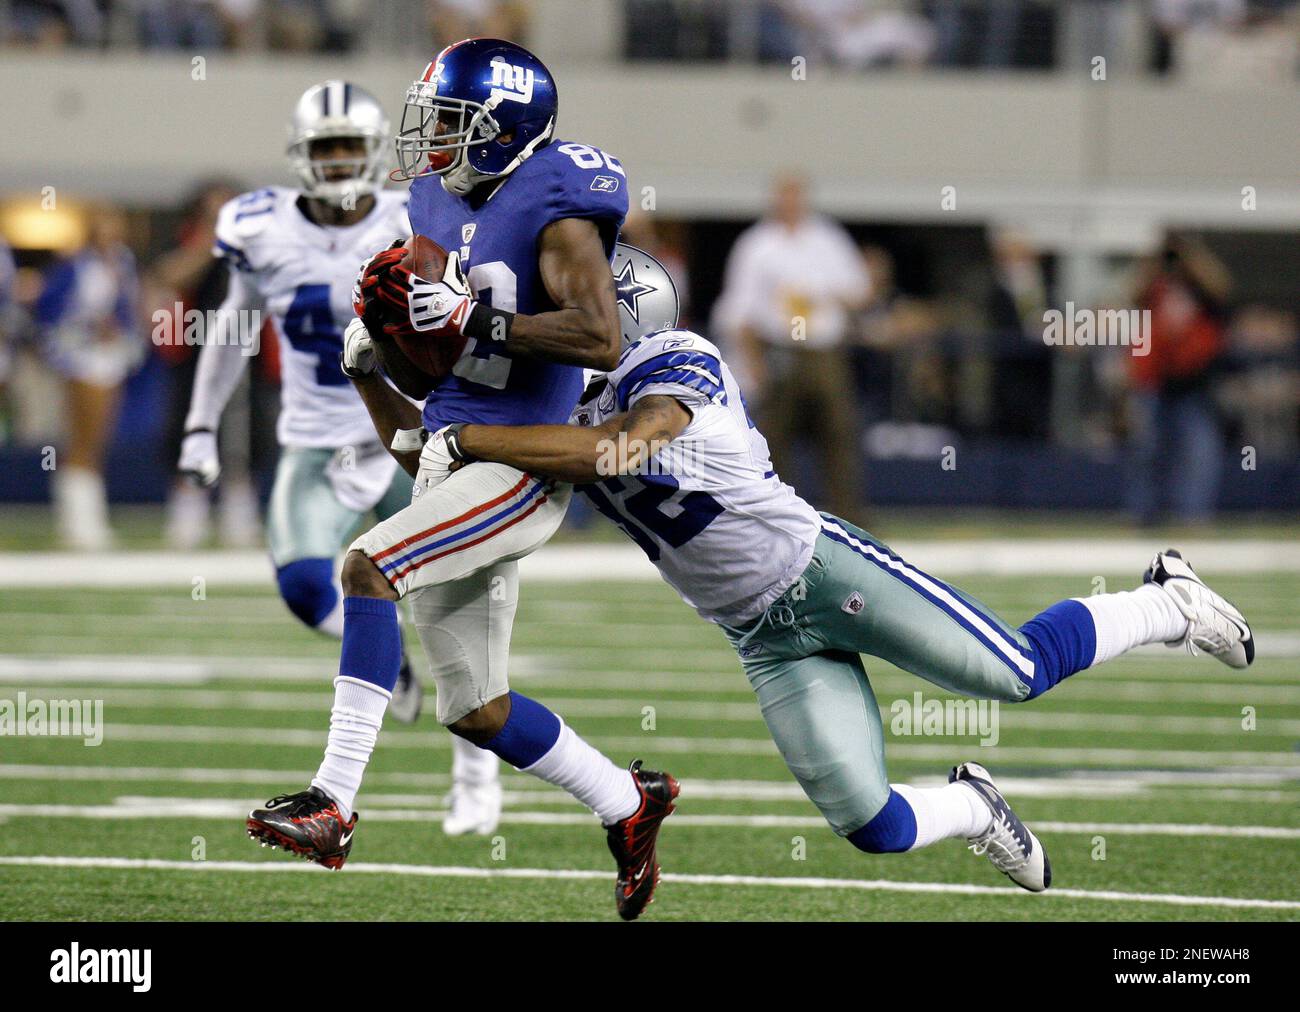 New York Giants wide receiver Mario Manningham (82) is tackled by Dallas Cowboys cornerback Orlando Scandrick (32) during an NFL football game,Sunday, Sept. 20, 2009, in Arlington, Texas. (AP Photo/LM Otero) Stock Photo